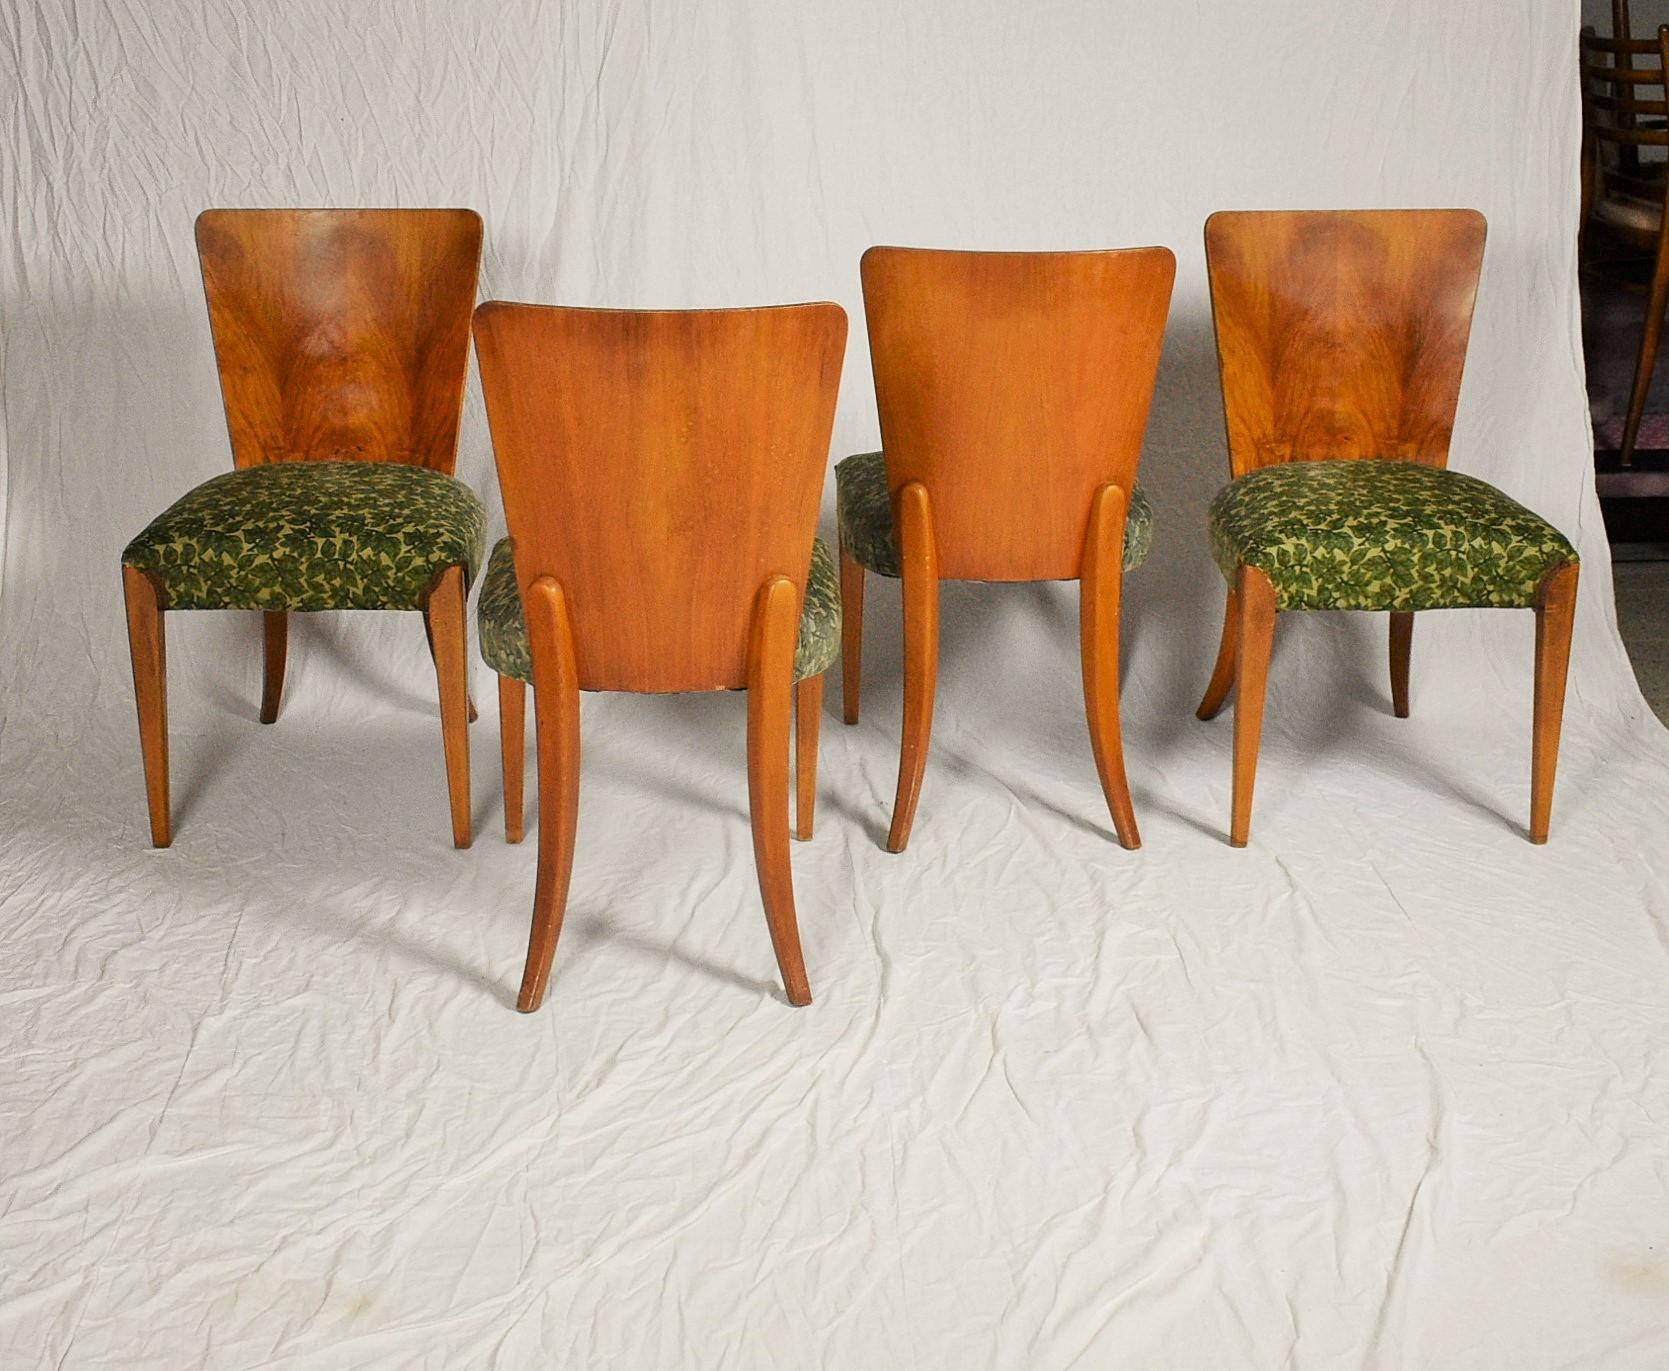 Set of four dining chairs, catalog number H-214, designed by Jindrich Halabala in the 1930s, manufactured in ÚP Závody in the 1950s. The chairs are in good original condition. The wooden parts were polished. 
- cleaning